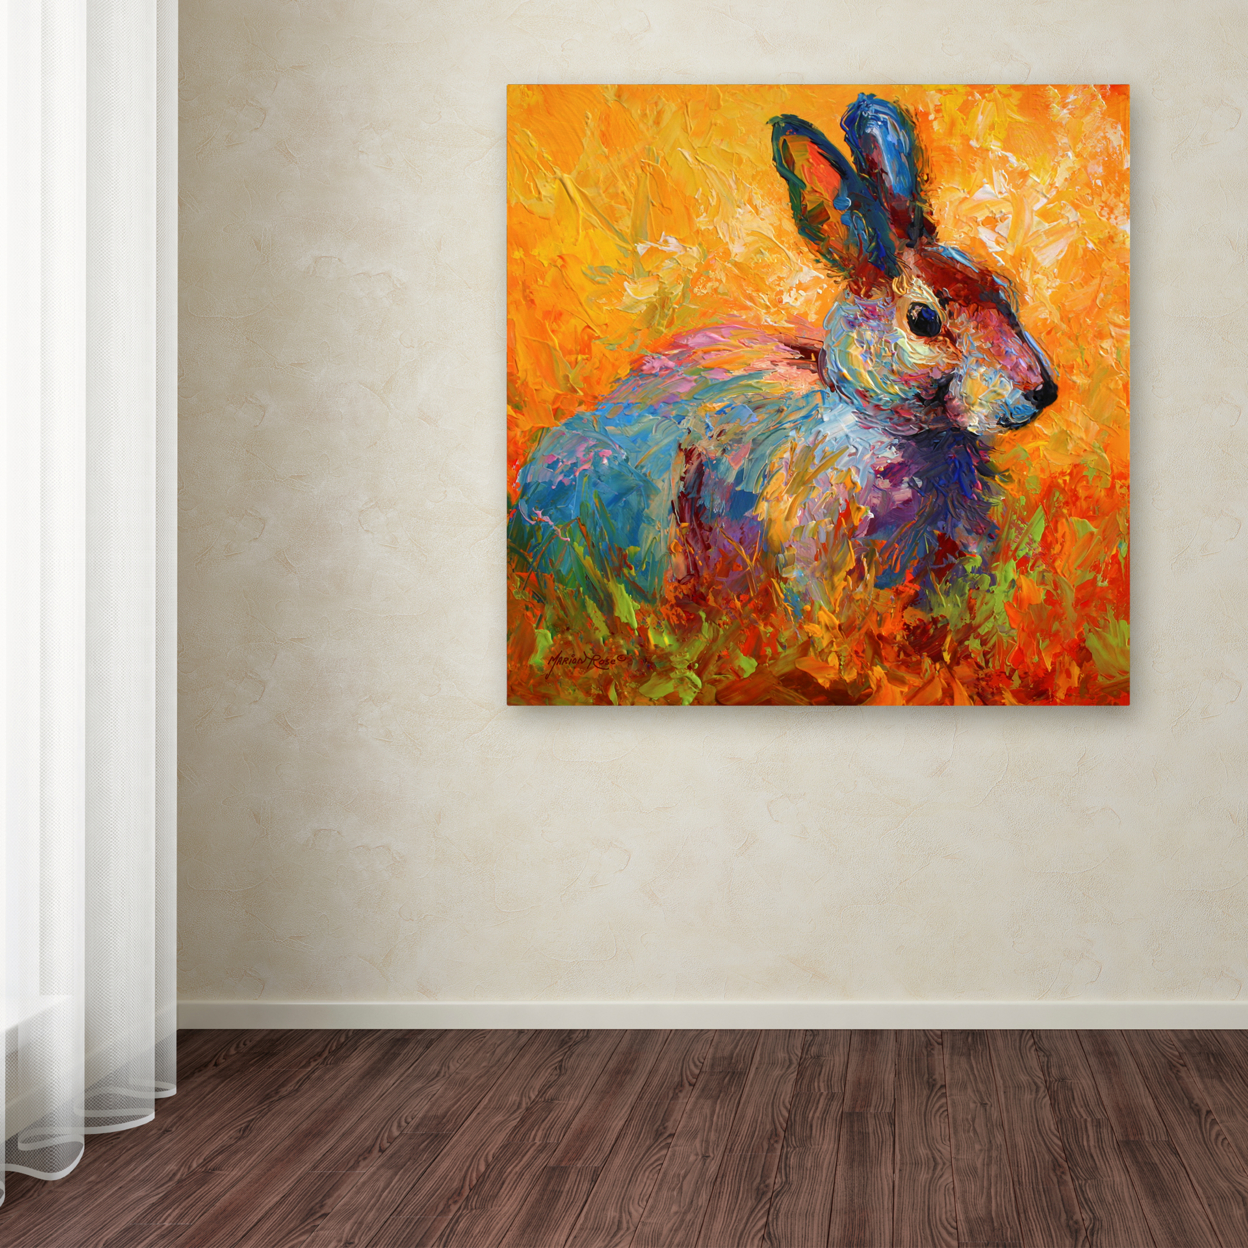 Marion Rose 'Bunny IV' Ready To Hang Canvas Art 24 X 24 Inches Made In USA